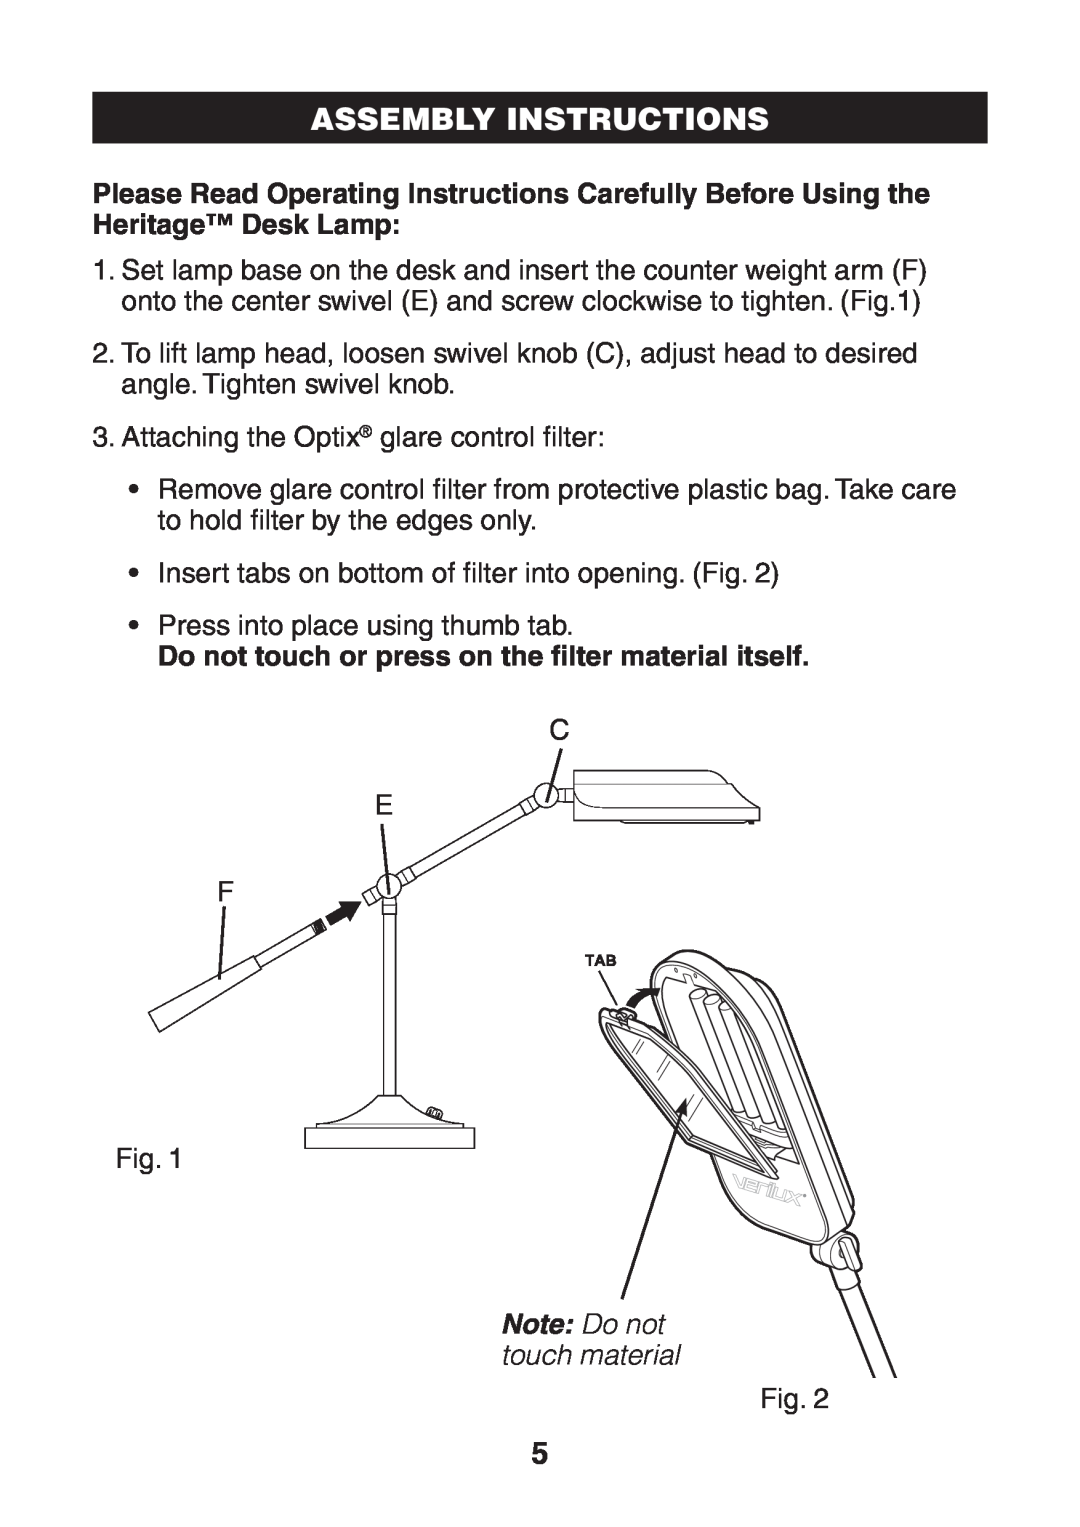 Verilux VD03 manual Assembly Instructions, Note Do not touch material 